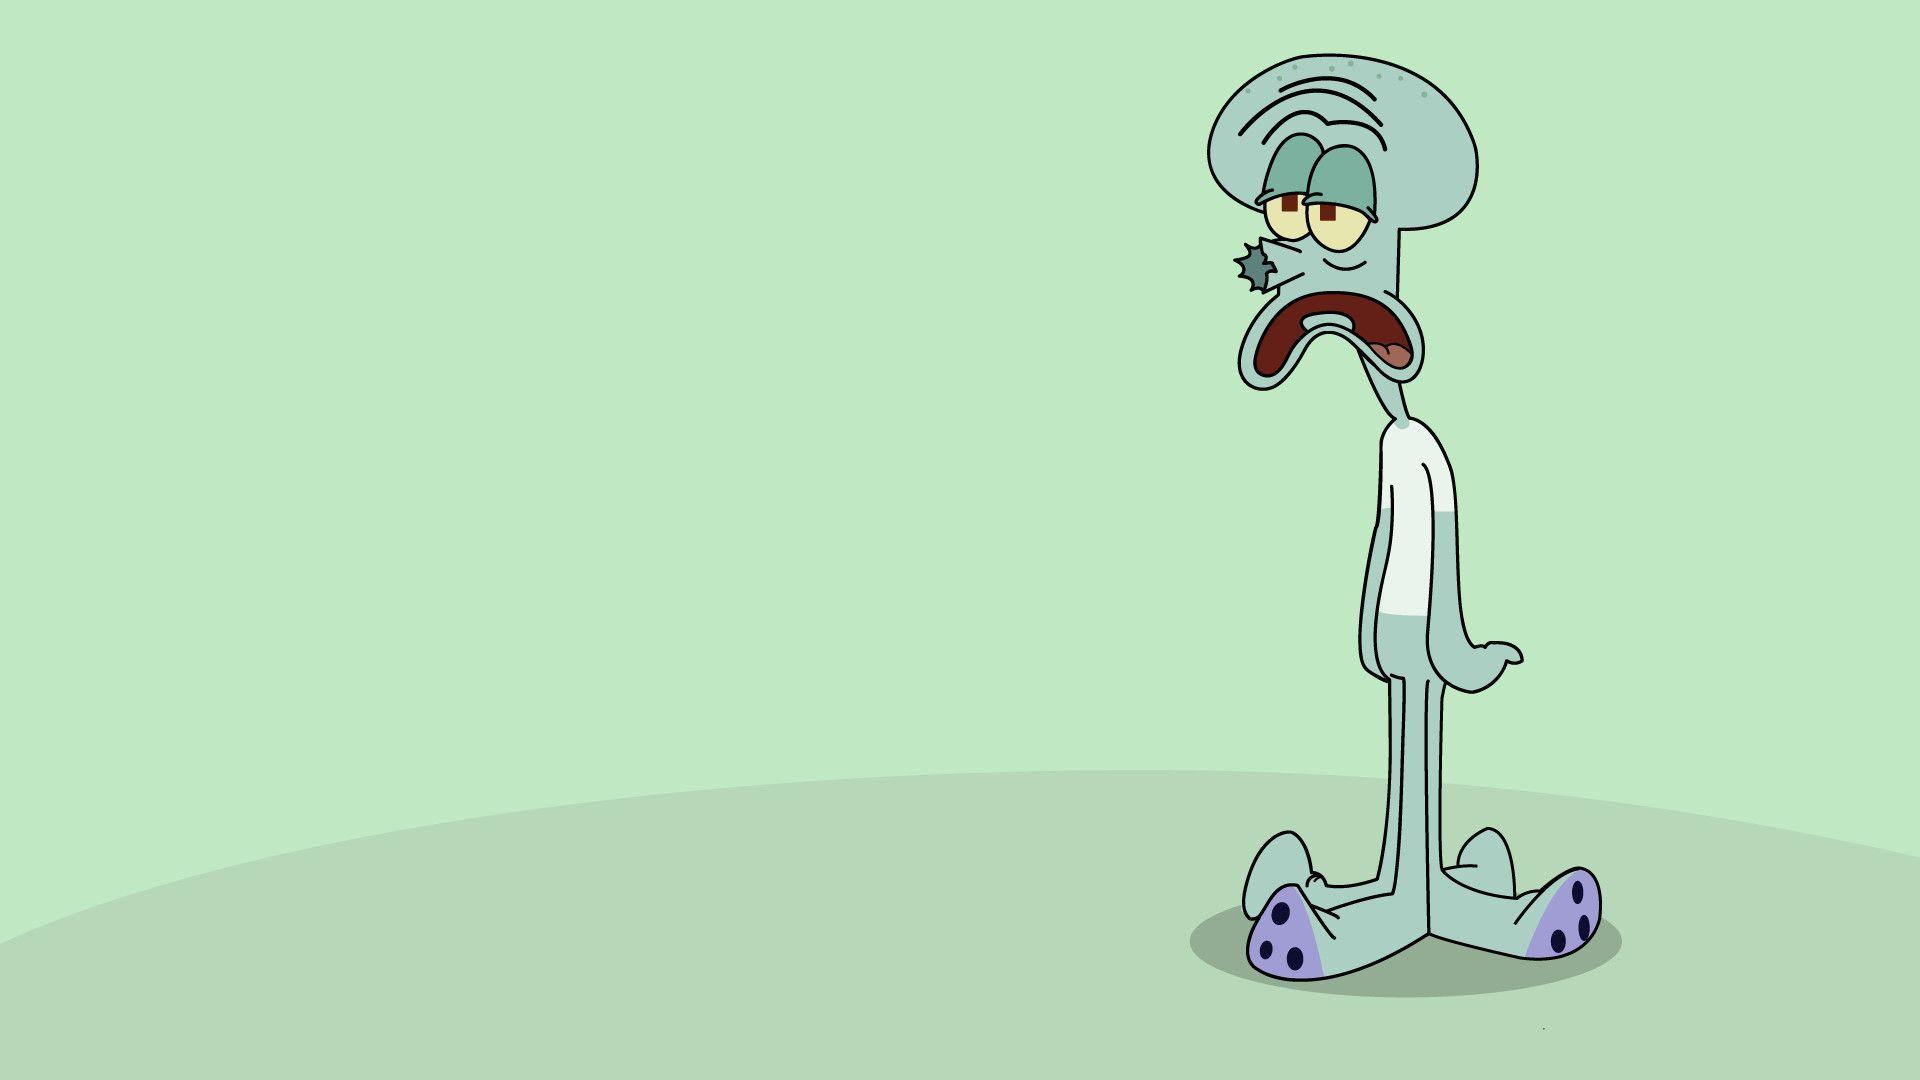 squidward sad wallpapers wallpaper cave on squidward sad wallpapers